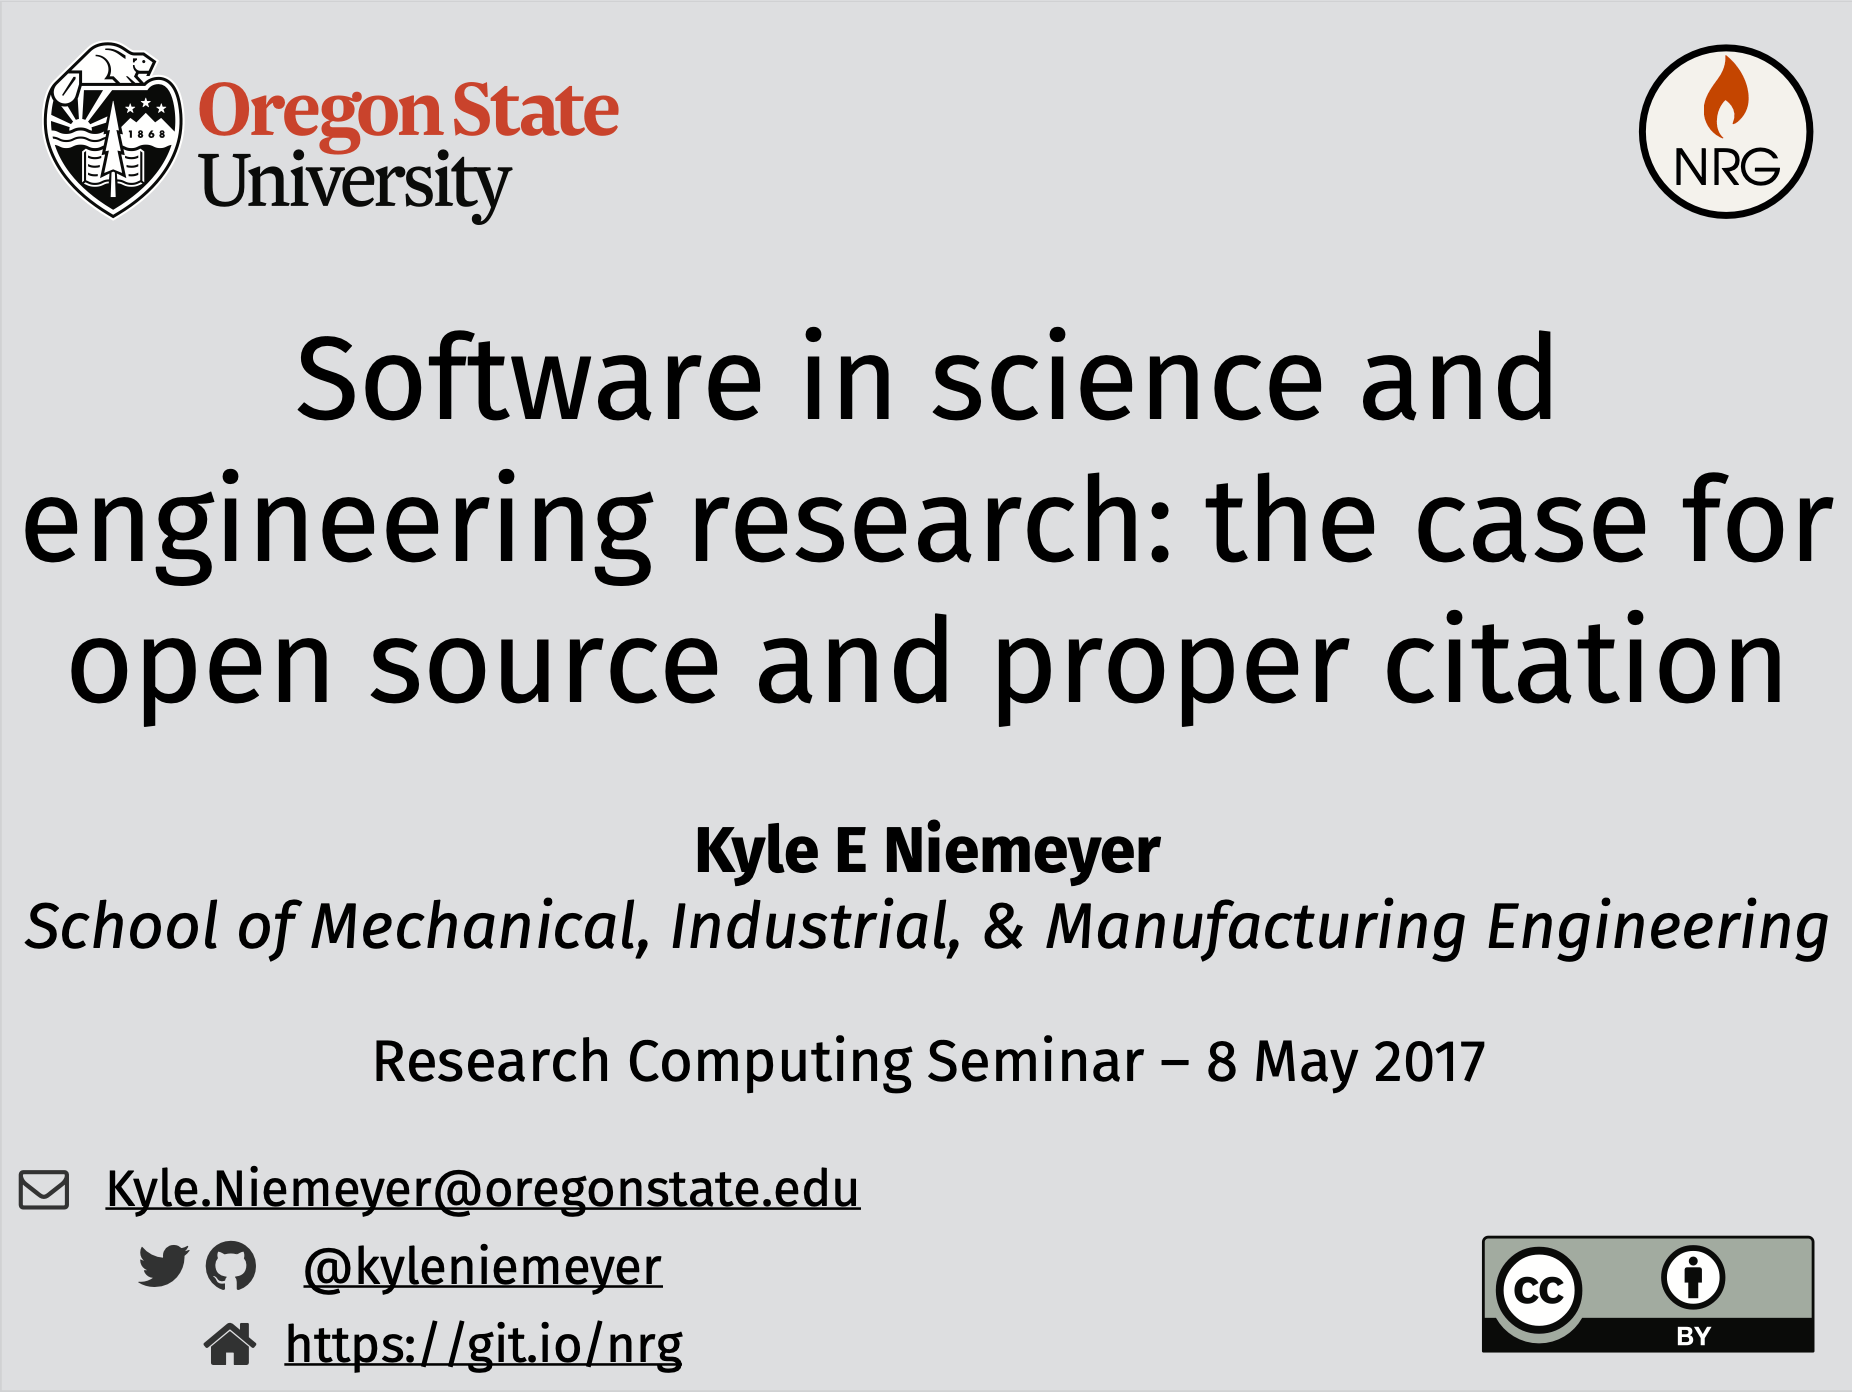 Title slide that says 'Software in science and engineering research: the case for open source and proper citation'.